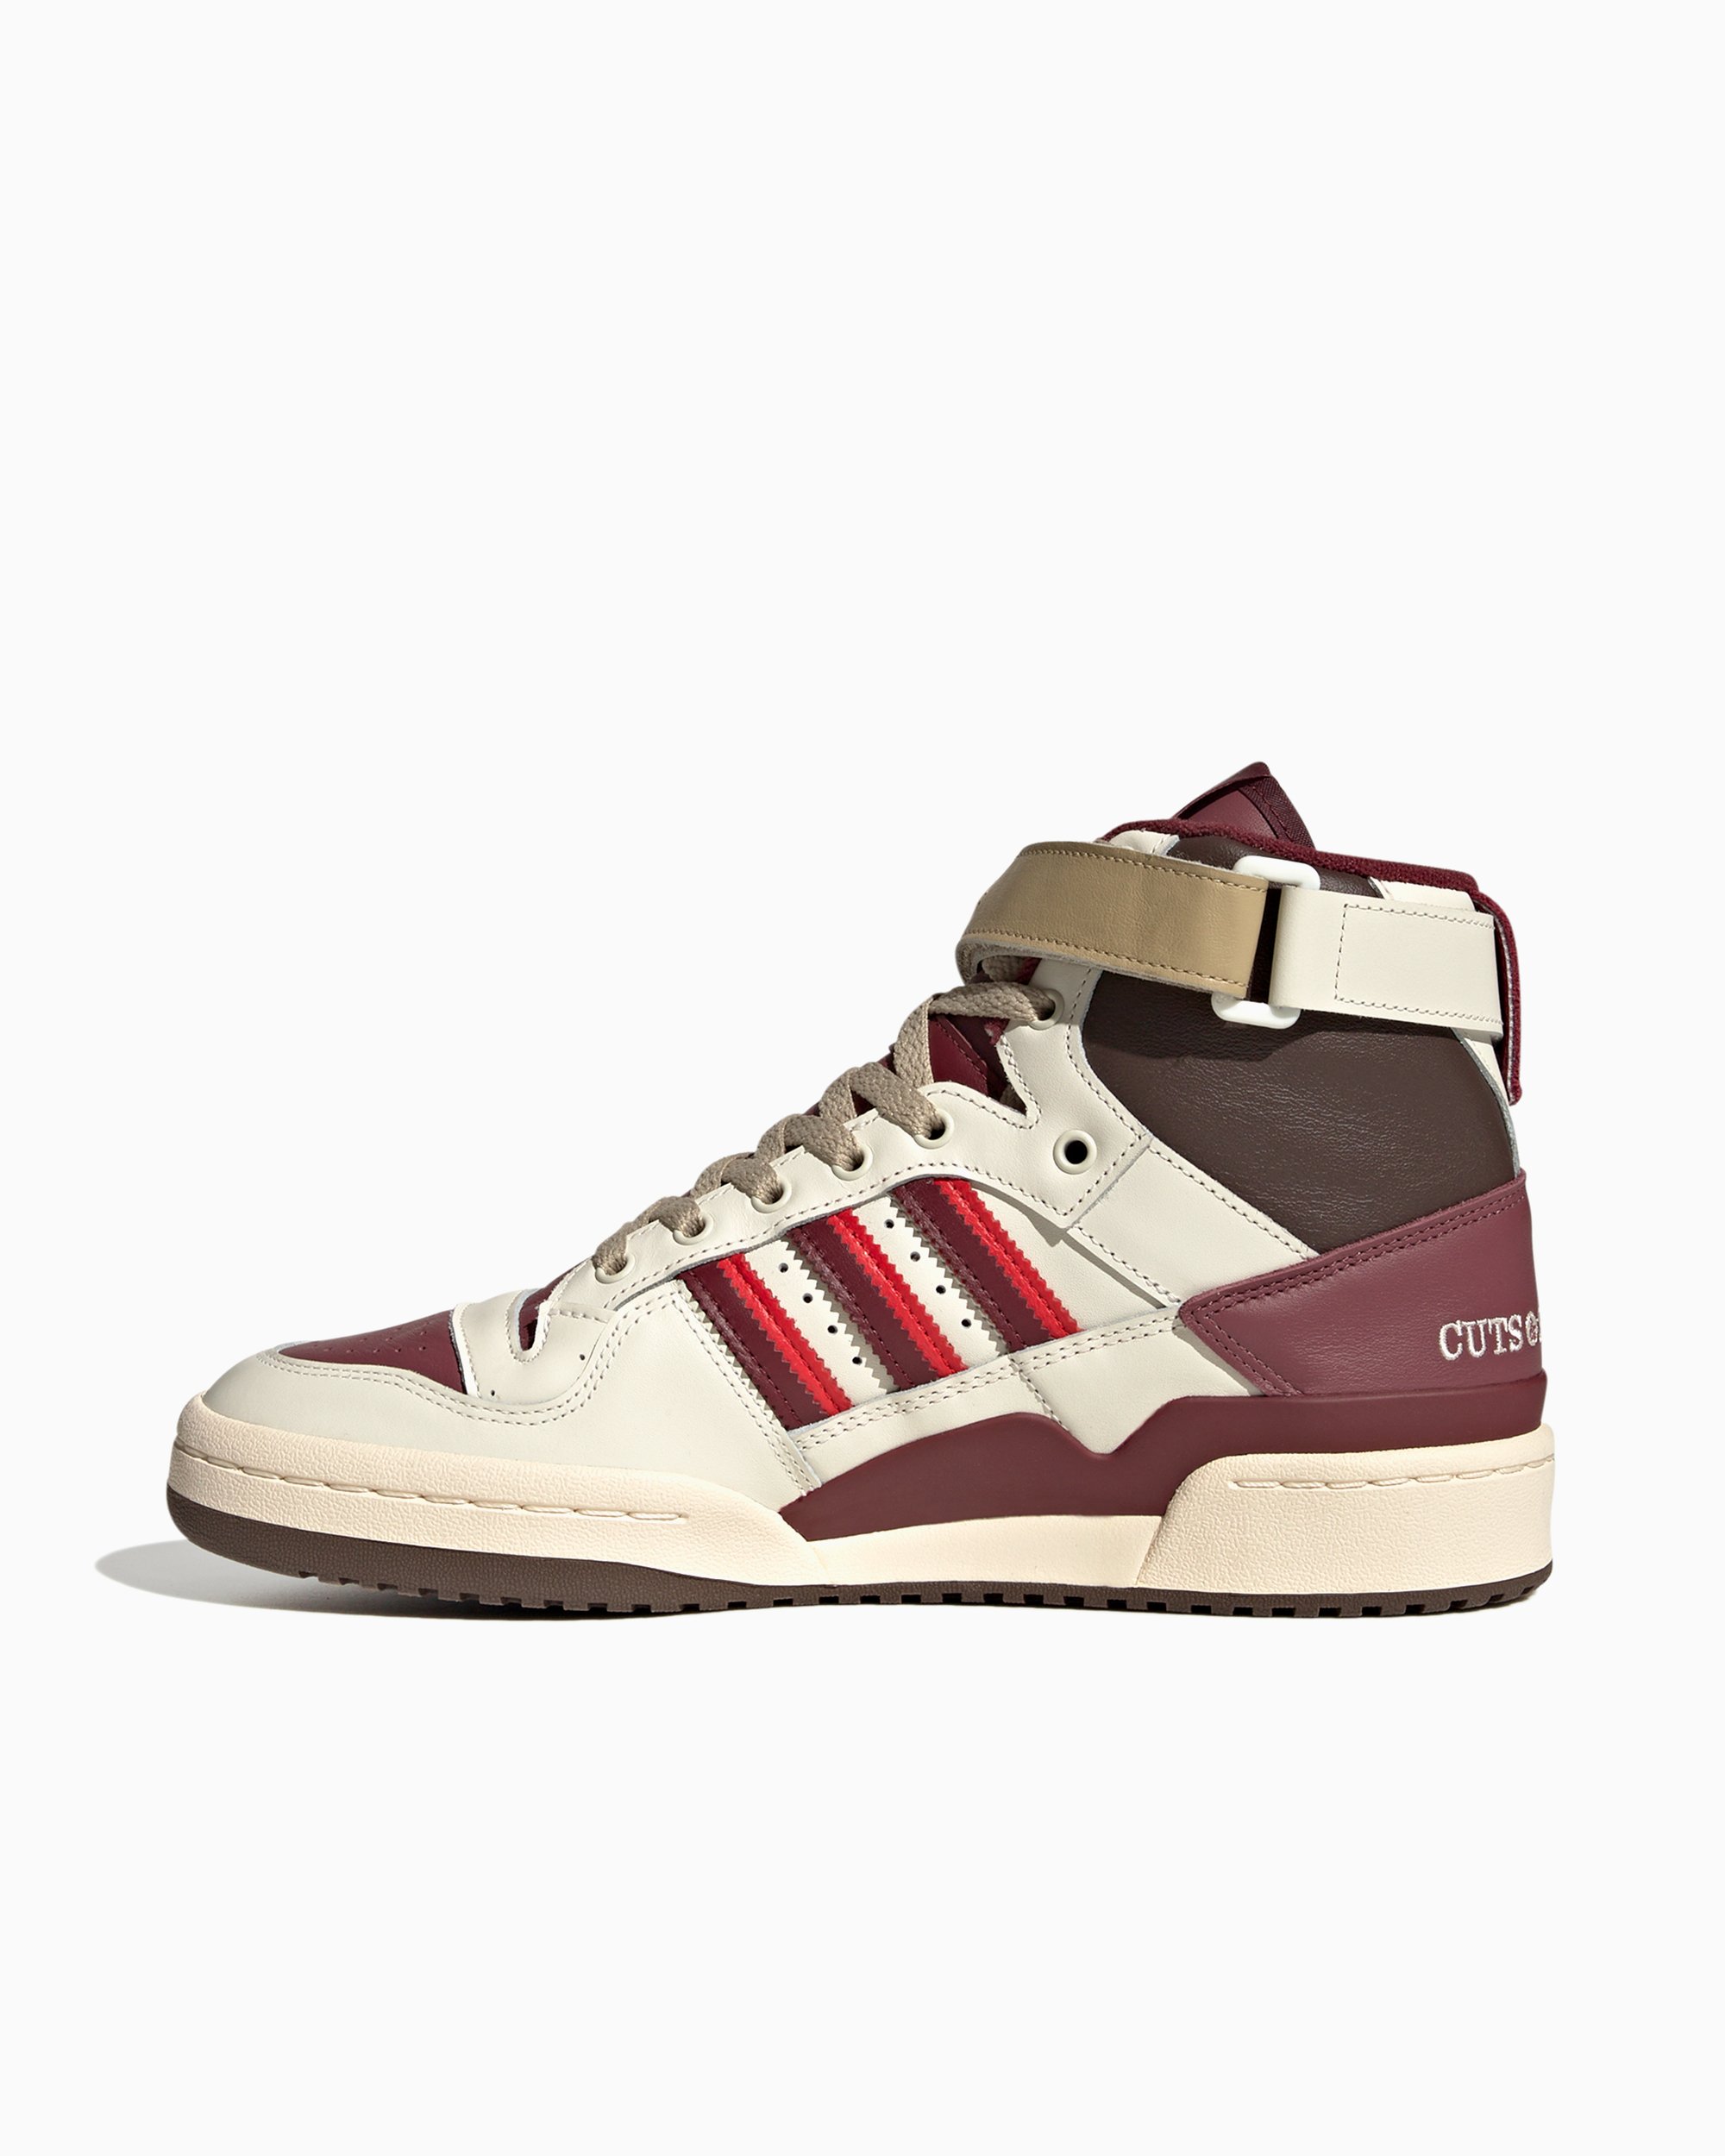 adidas x Cuts and Slices Forum Hi 